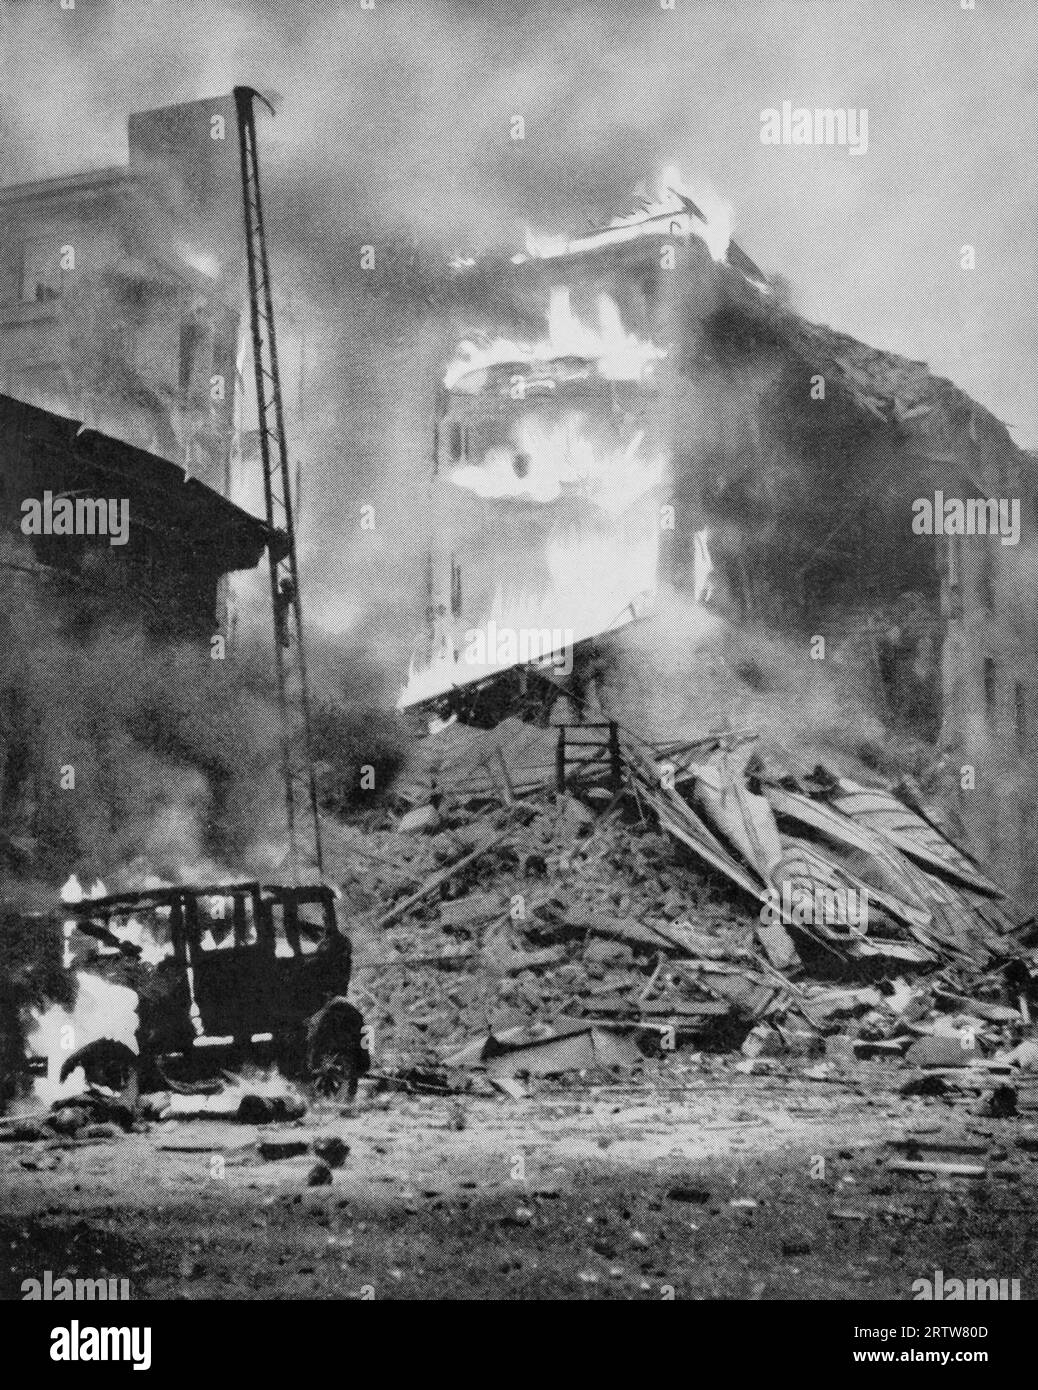 The aftermath of an air raid by Russian bombers on Helsinki, Finland on the 30th November 1939. On 23 August 1939 the Soviet Union signed a non-aggression pact with Germany which included a secret protocol that divided Eastern Europe into German and Soviet 'spheres of influence', anticipating potential 'territorial and political rearrangements' of these countries. Stock Photo